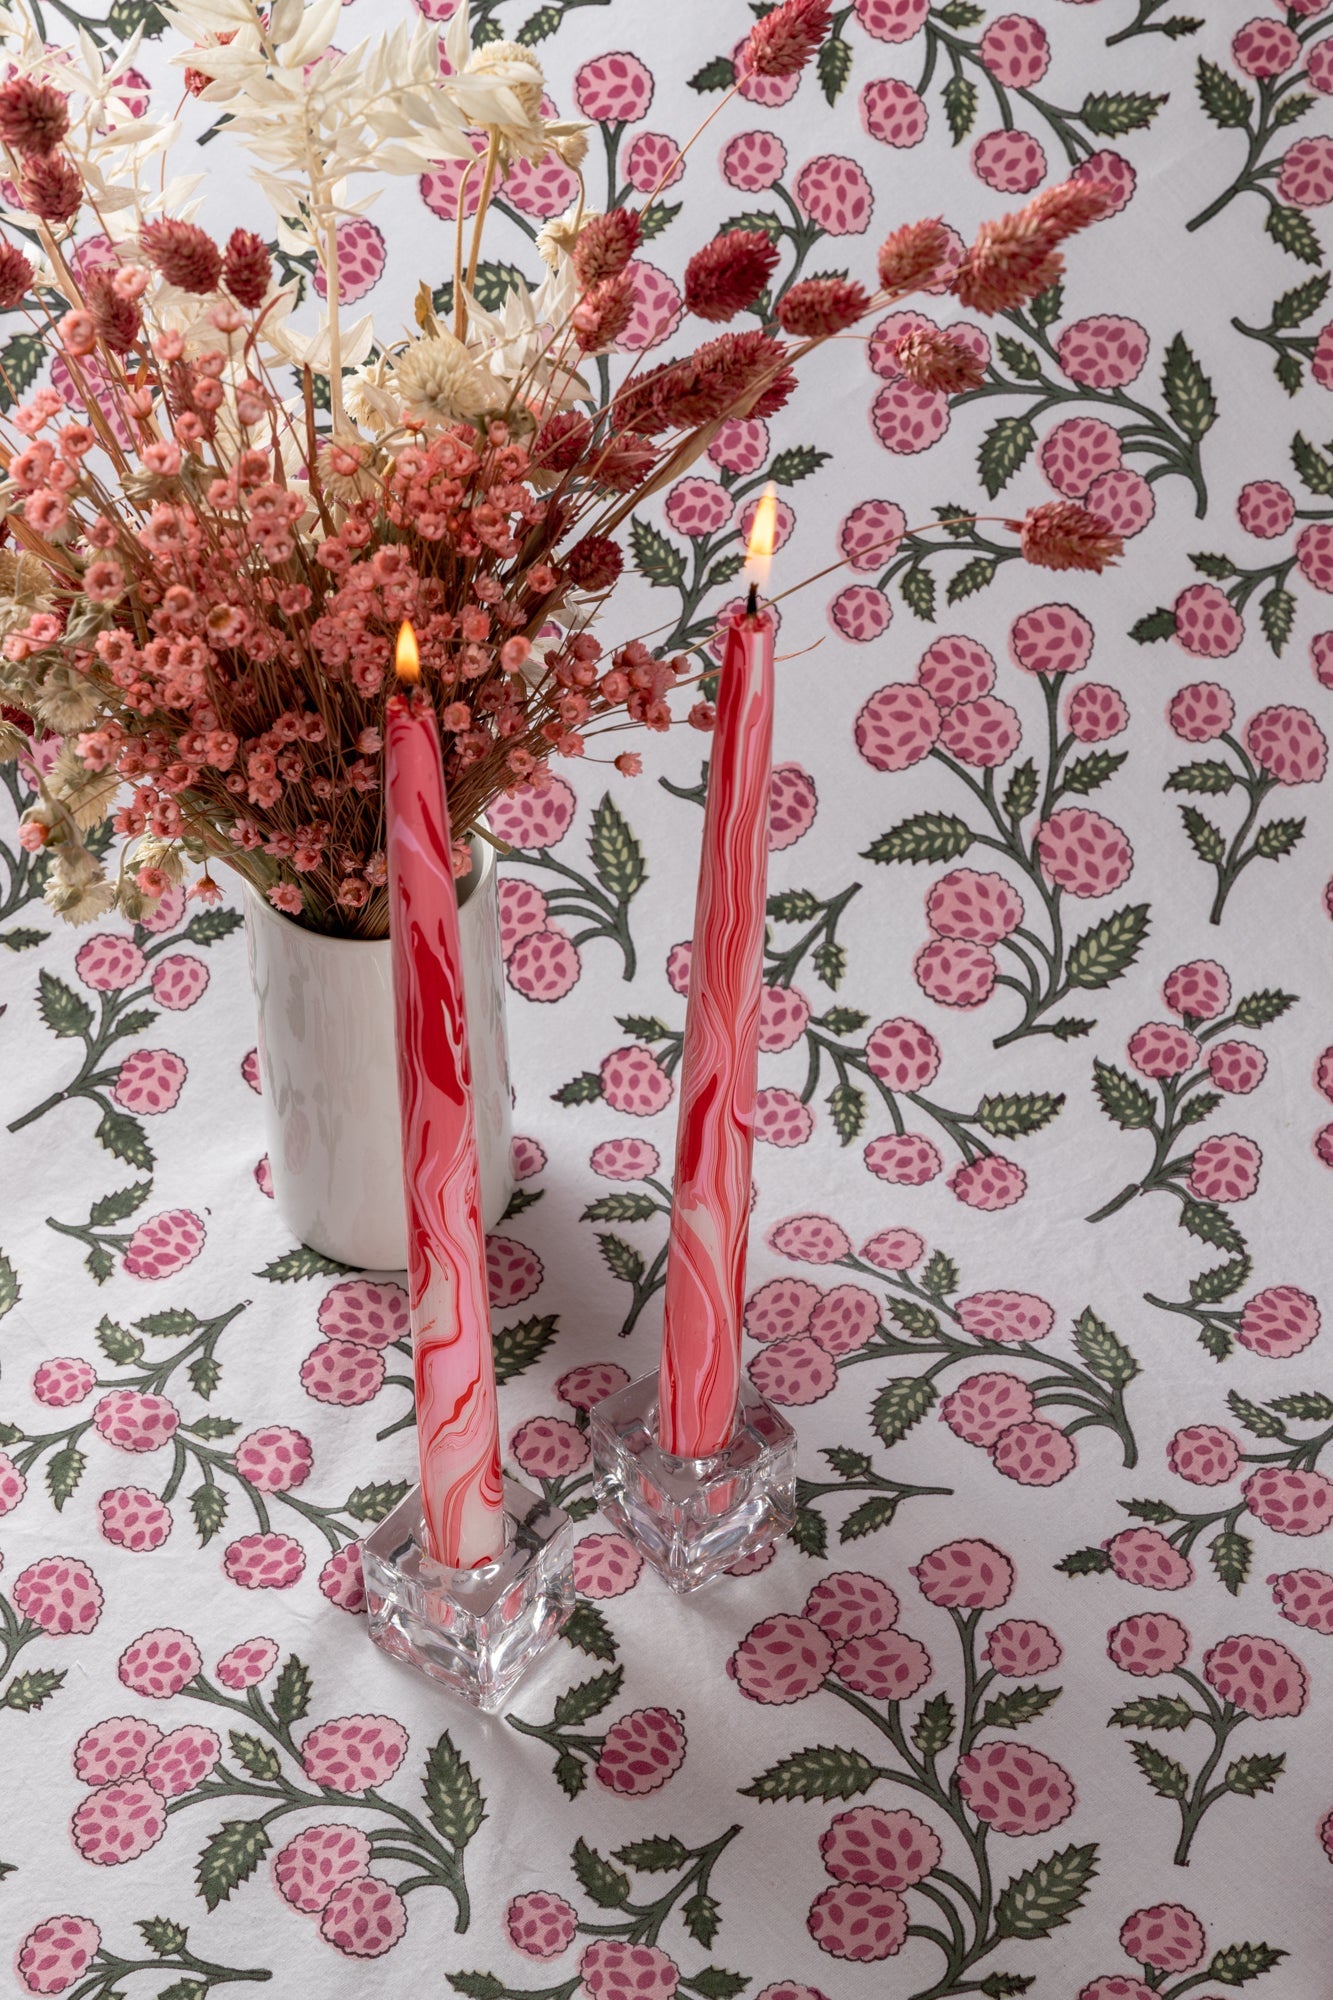 Pink Hydrangea Tablecloth by Holly Harris Designs